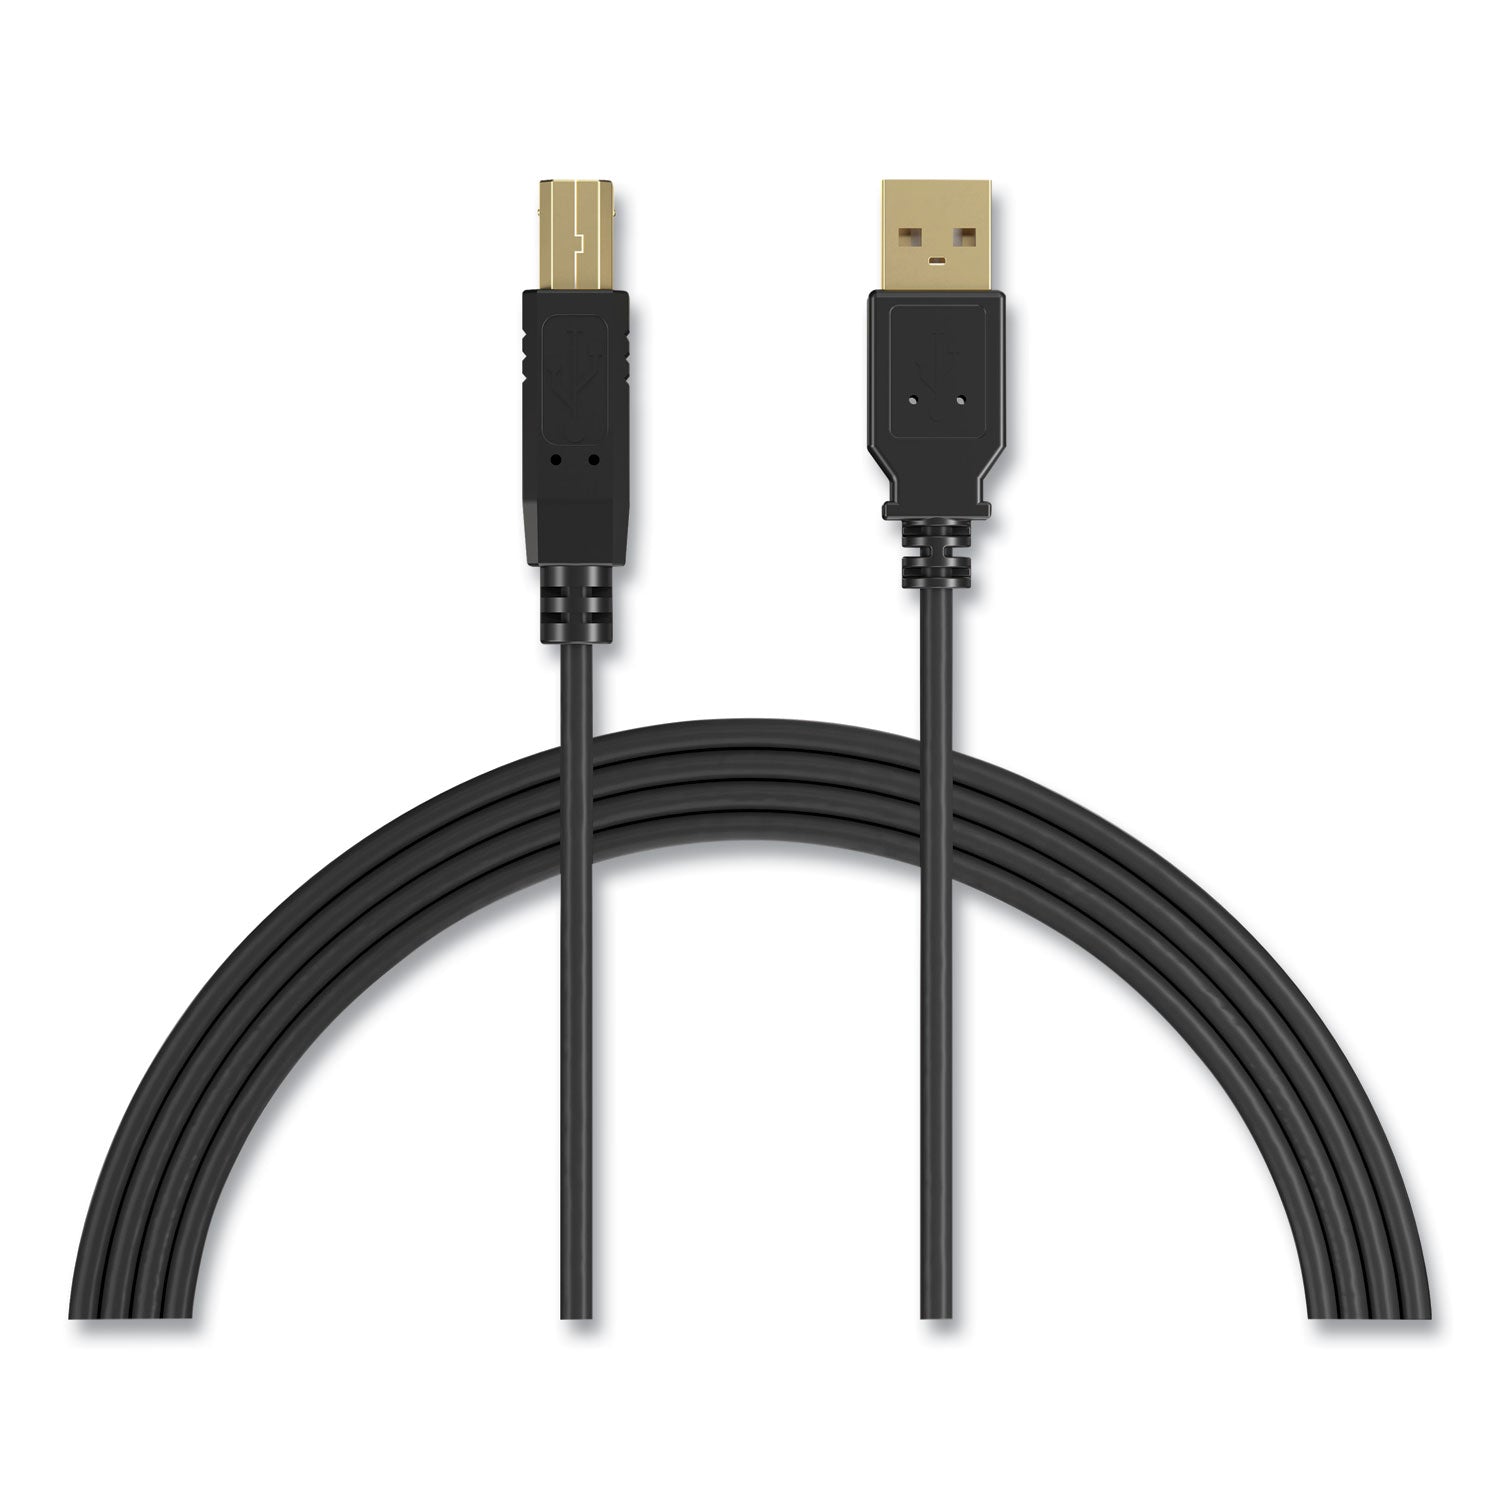 usb-printer-cable-gold-plated-connectors-16-ft-black_nxt24400026 - 3